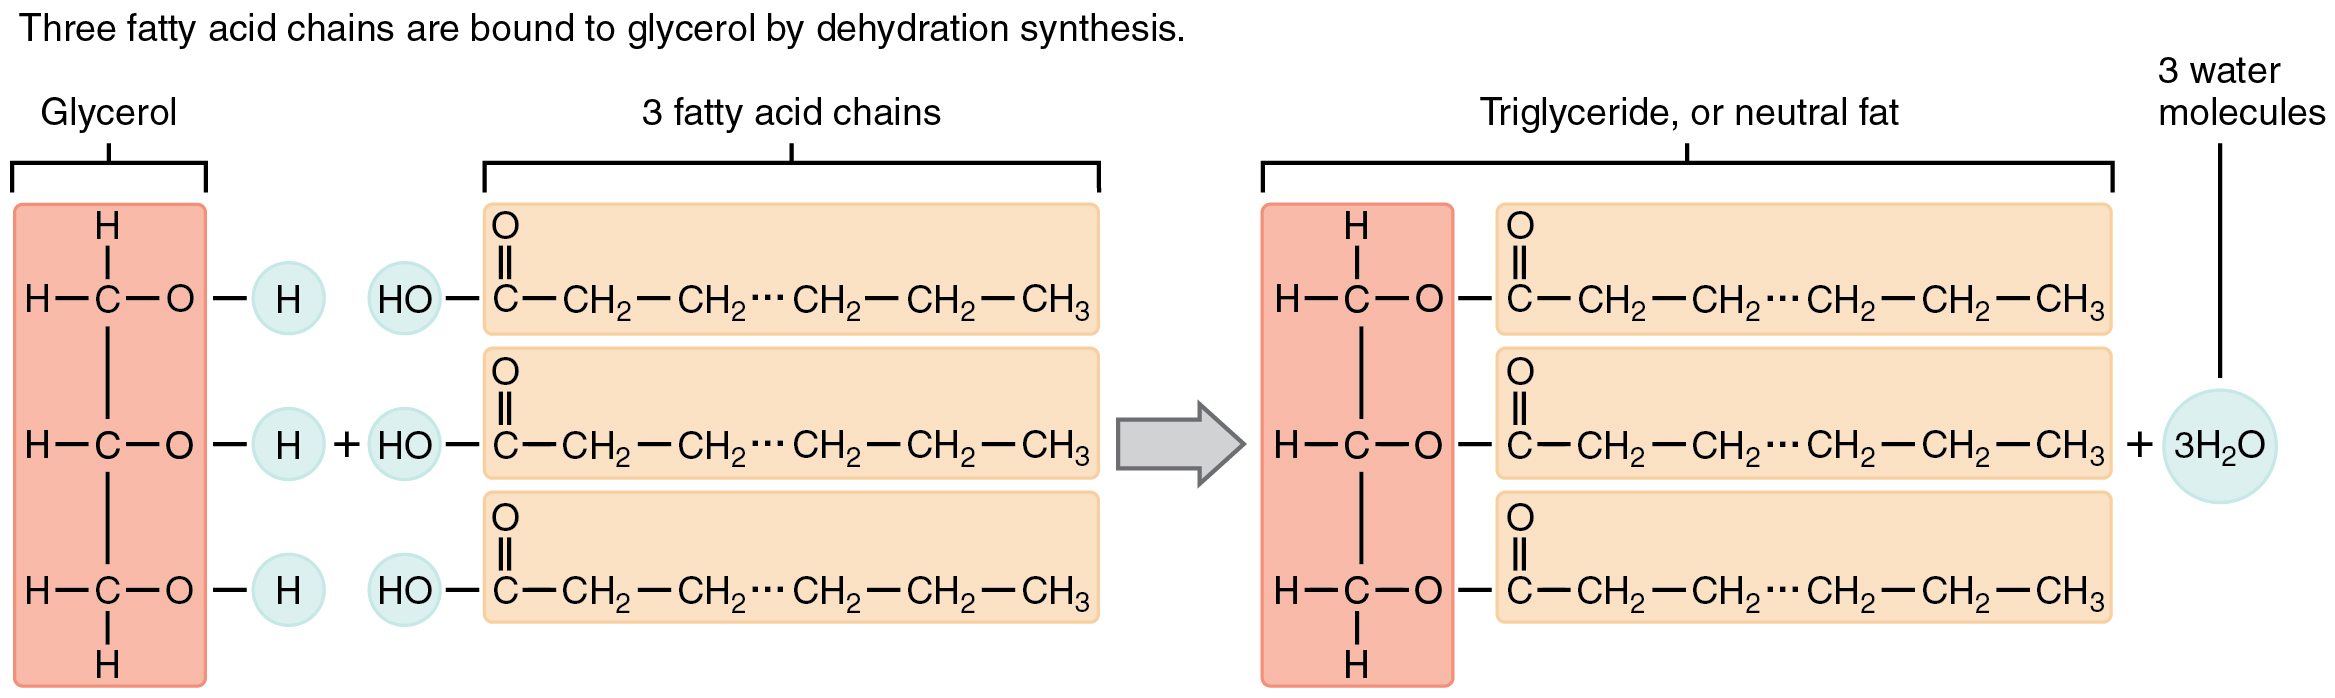 Glycerol and three fatty chain acid interaction, described in the text that follows.